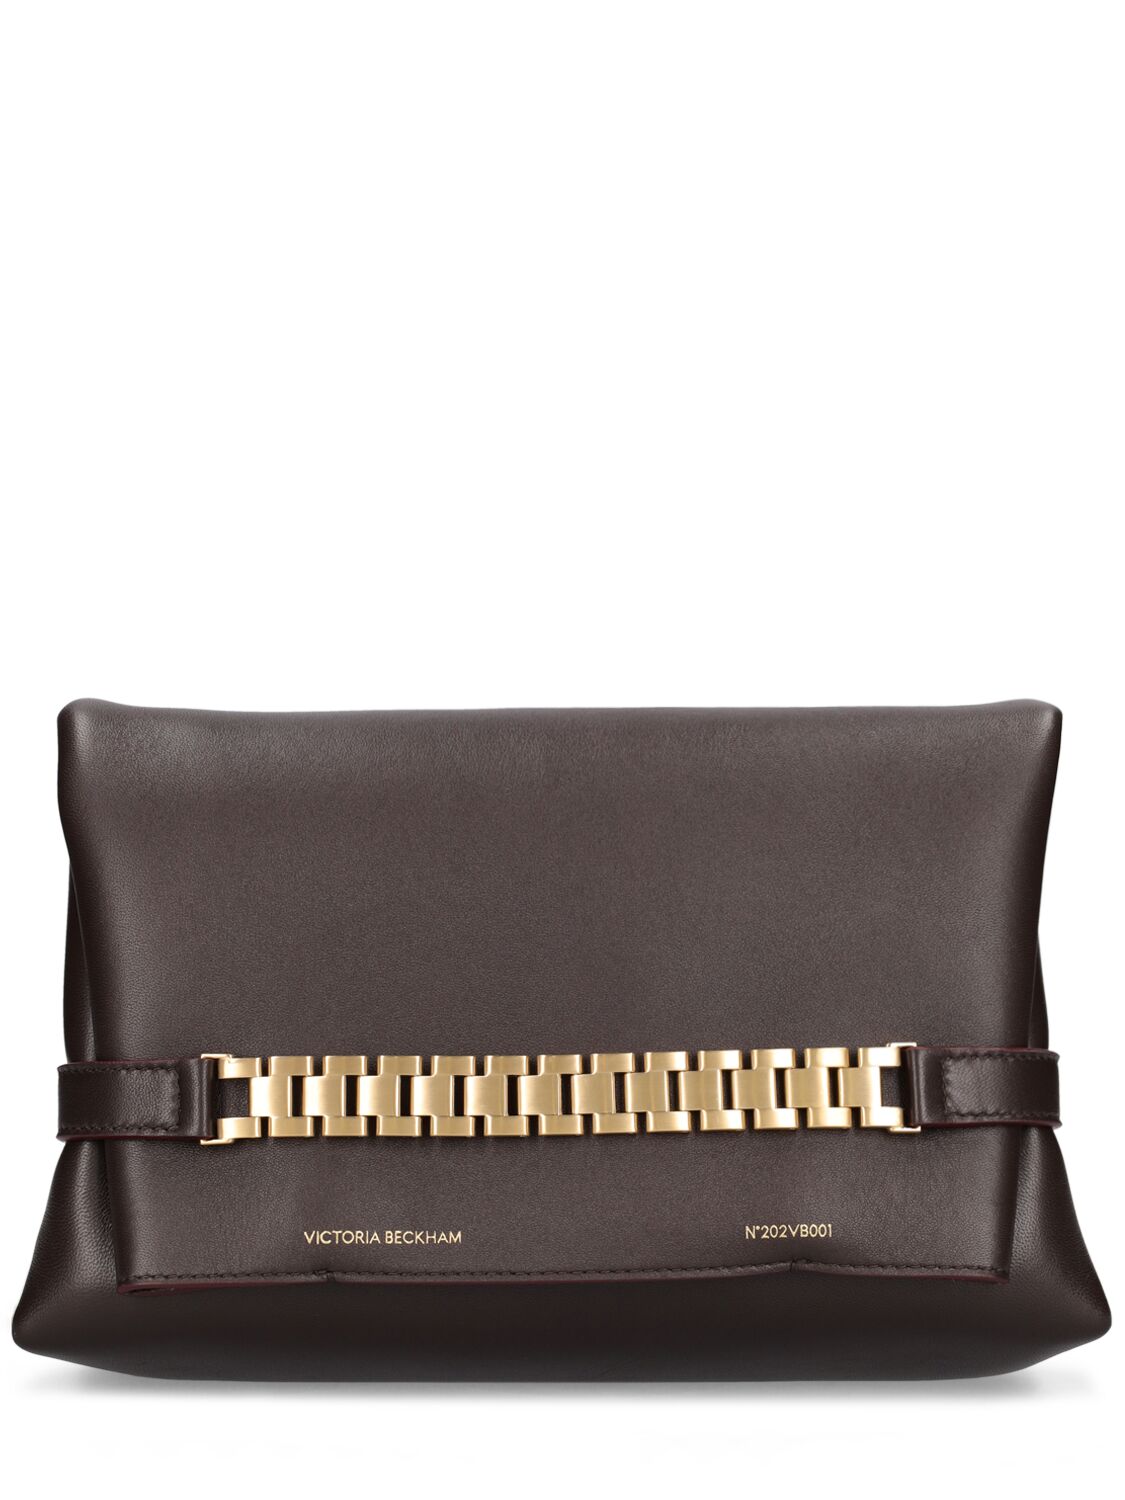 Victoria Beckham Chain Leather Shoulder Bag In Cocoa